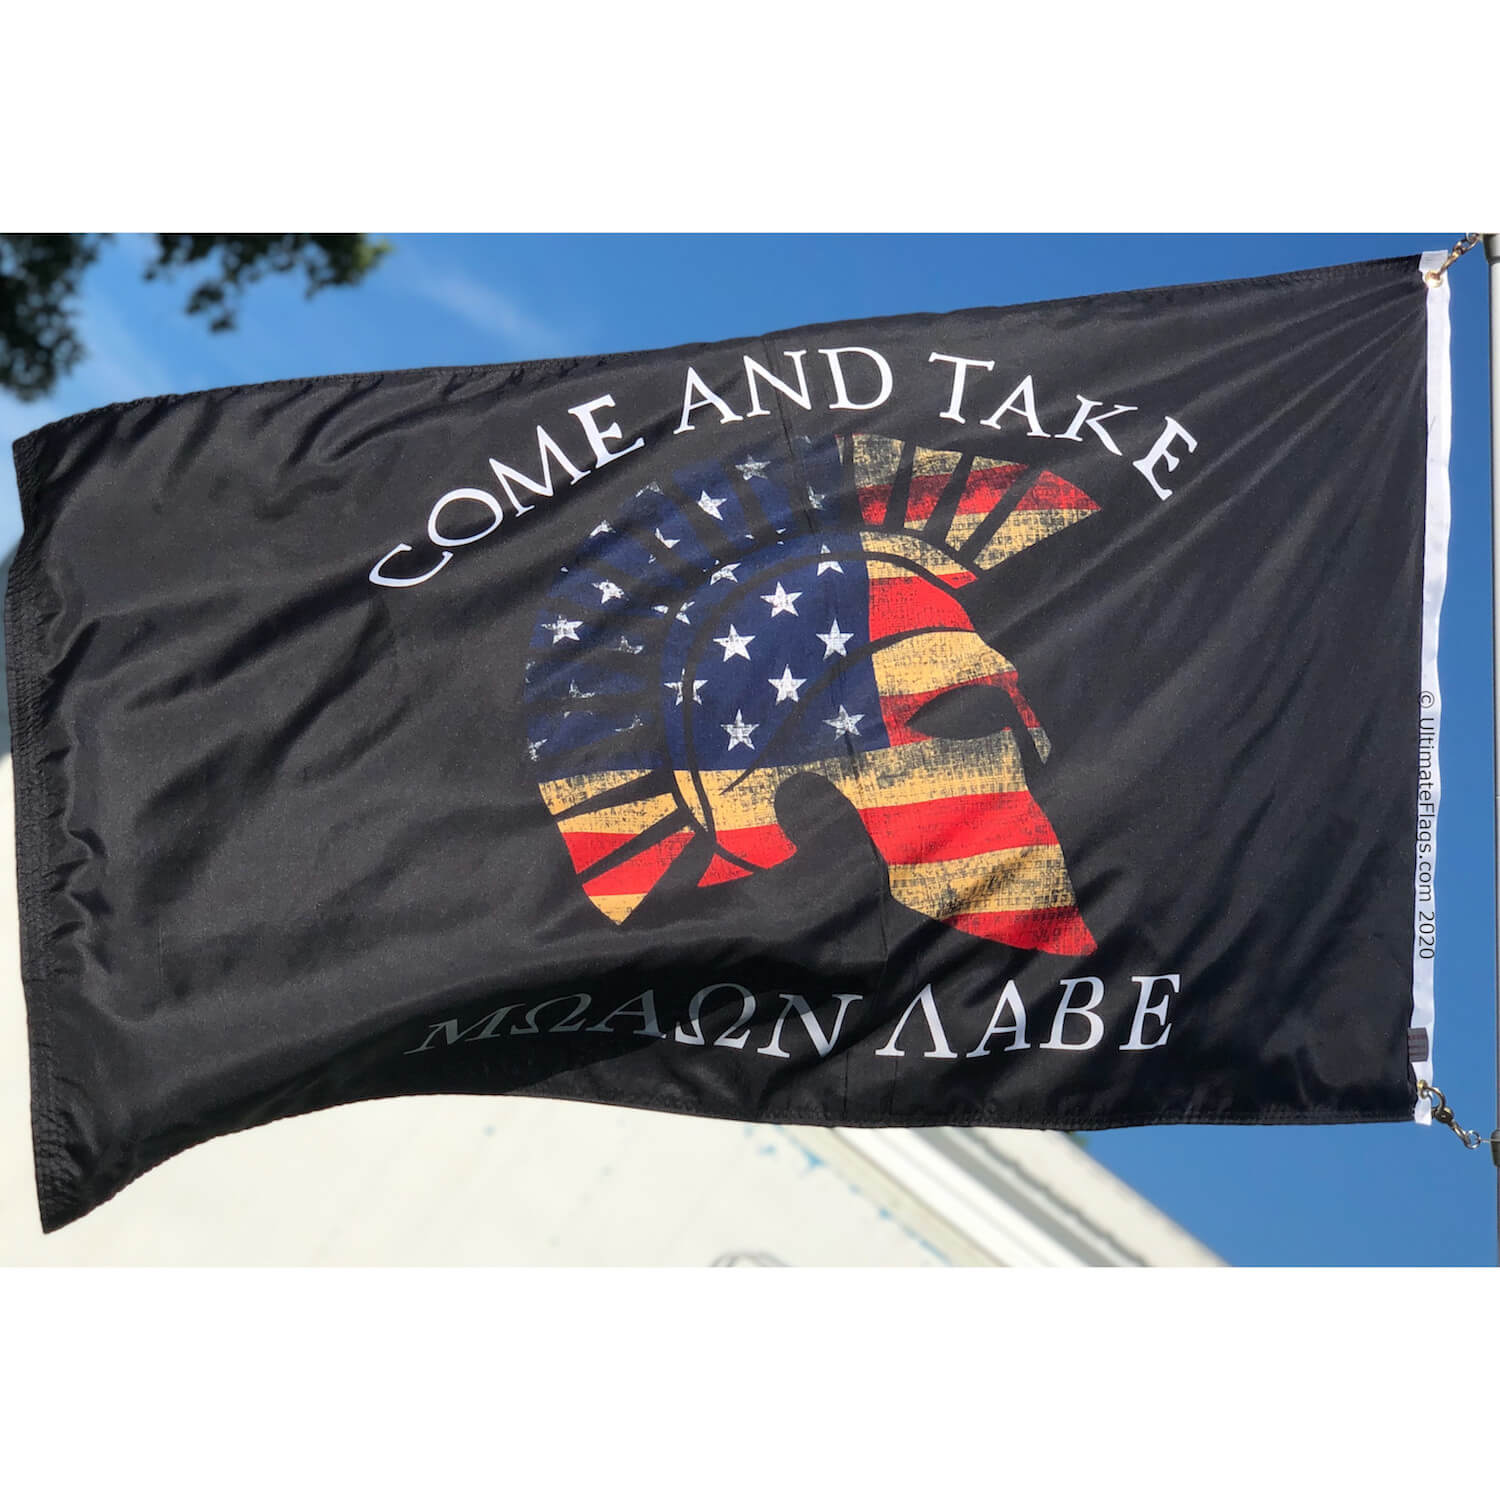 Ultimate Flags Inc: A Canvas of American Courage